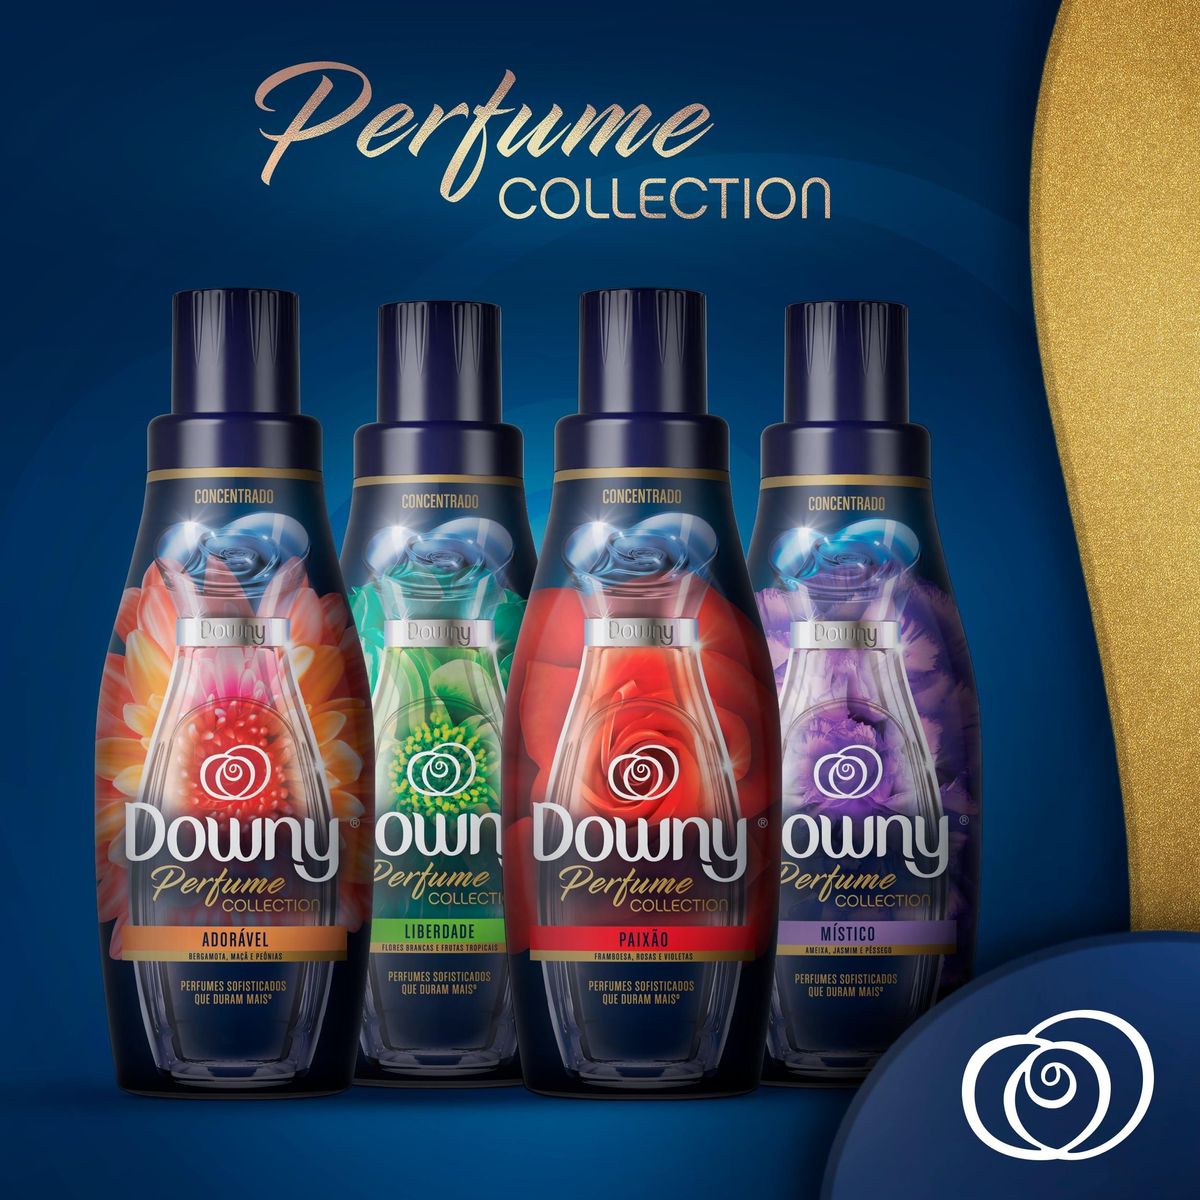 Amaciante Conc. Downy Perfume Collection Liberdade 900ml image number 2